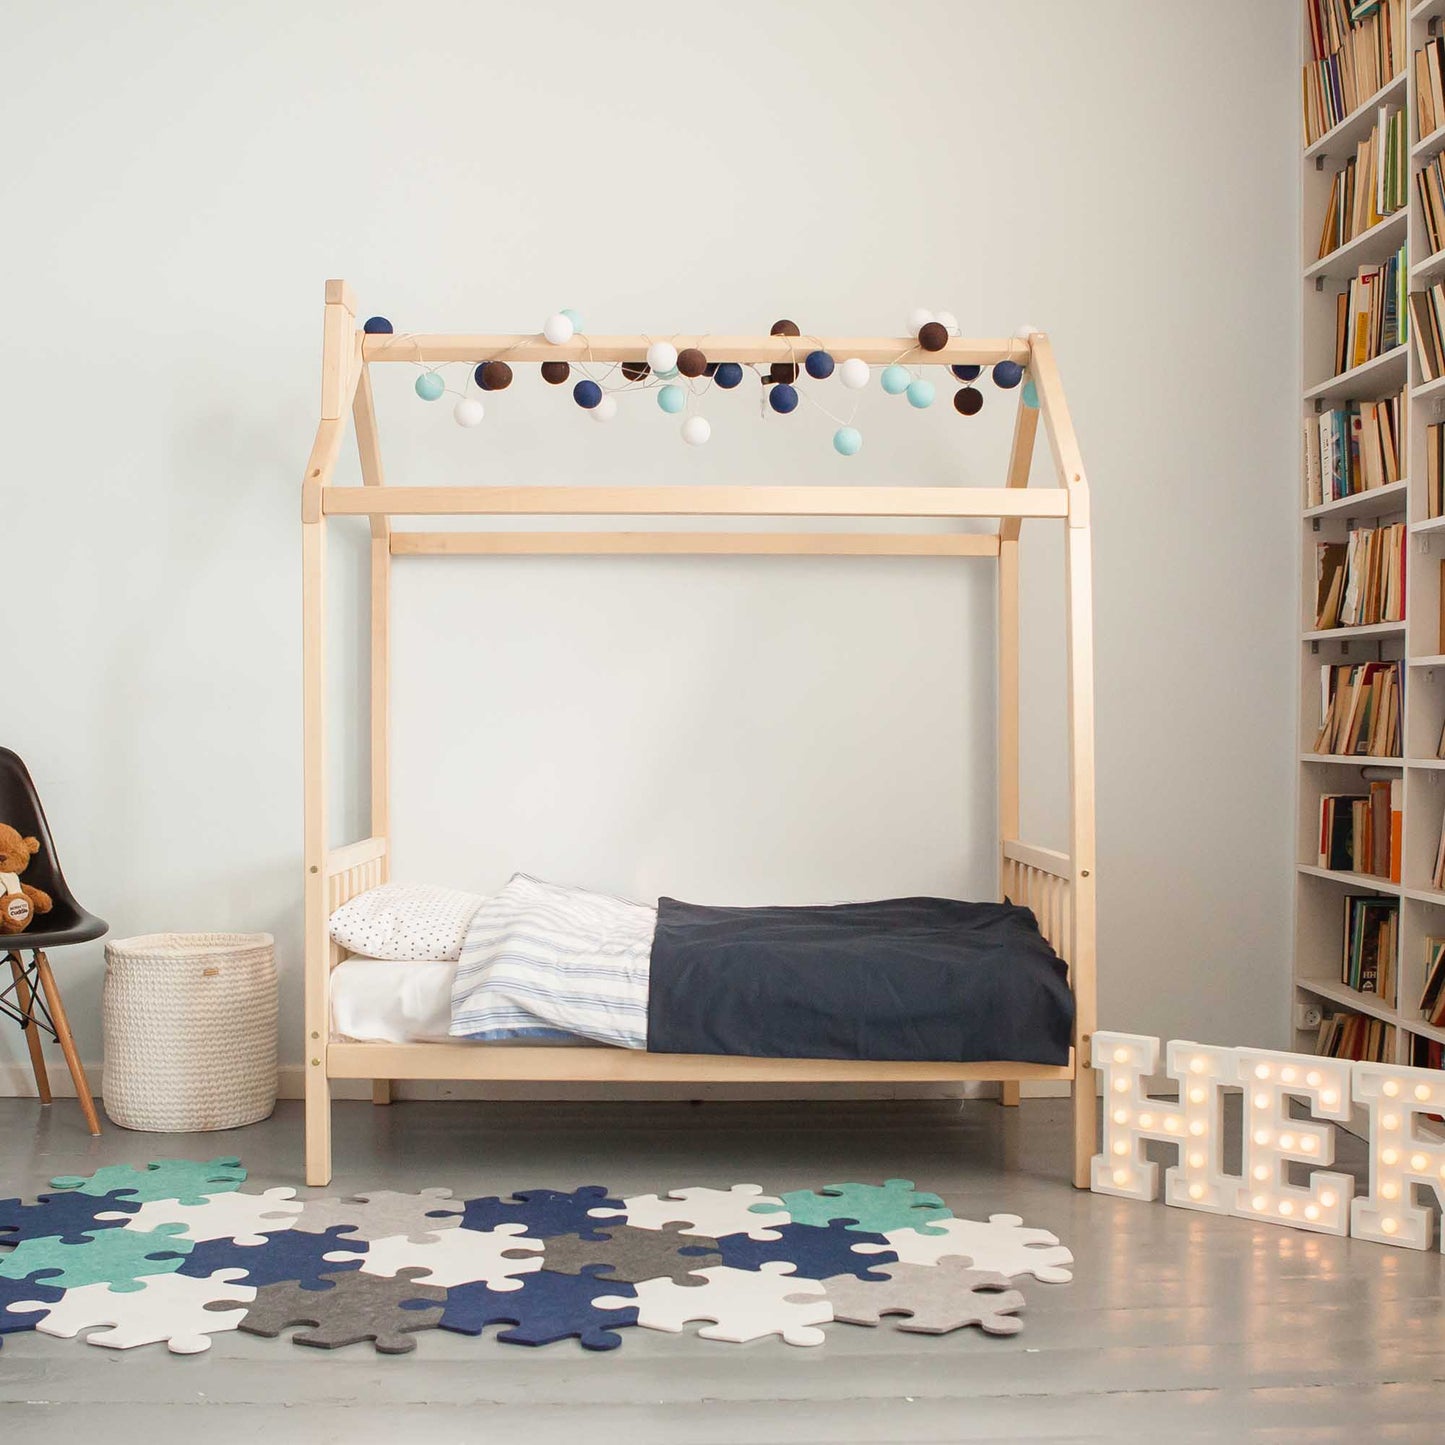 A child's room with a Toddler house bed on legs with a headboard and footboard and wooden bookshelves.